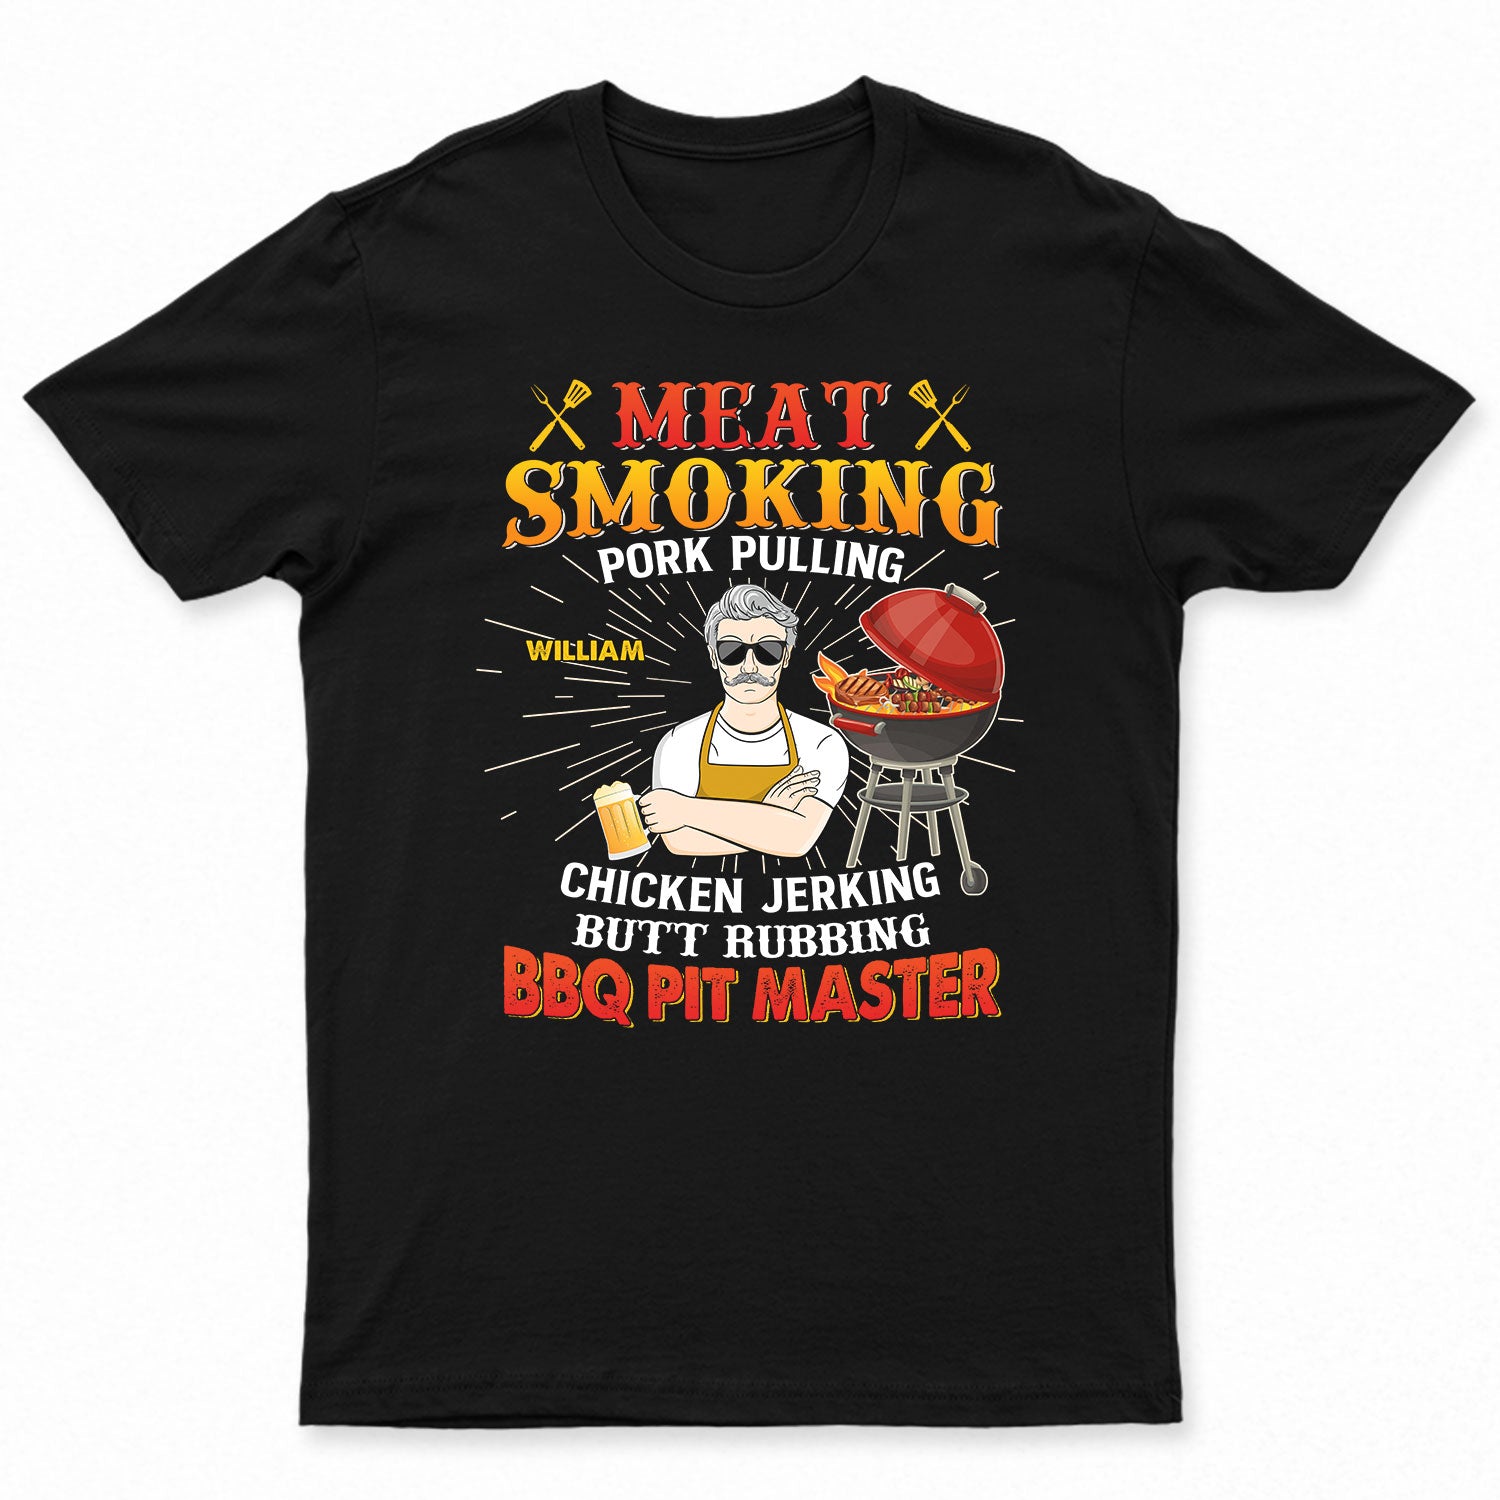 Meat Smoking Pork Pulling - Gift For Father, Dad - Personalized T Shirt